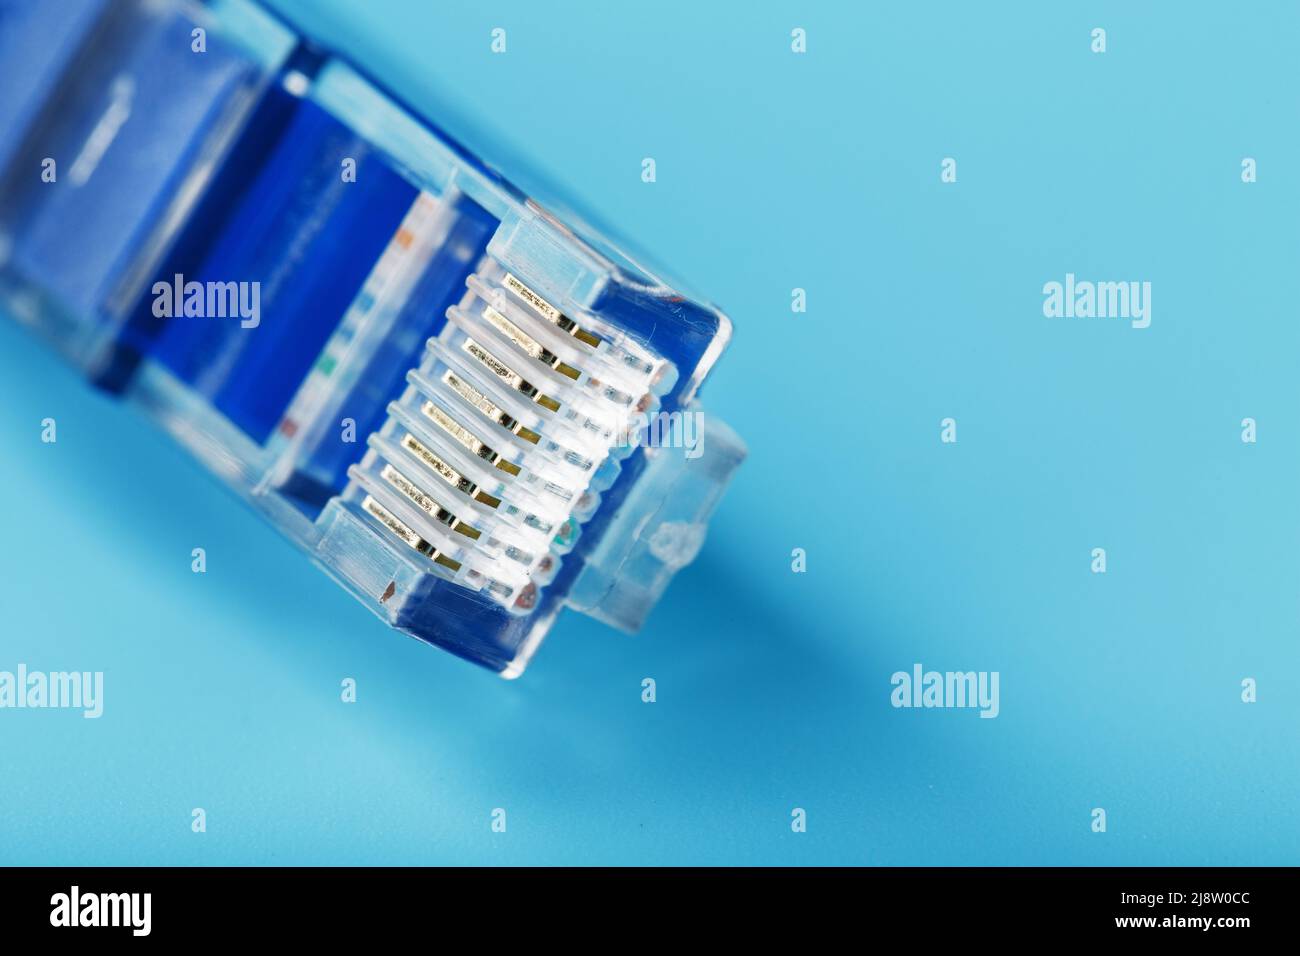 A coil of an Internet network cable for data transmission on a blue background. Patch cord for LAN cable. Stock Photo